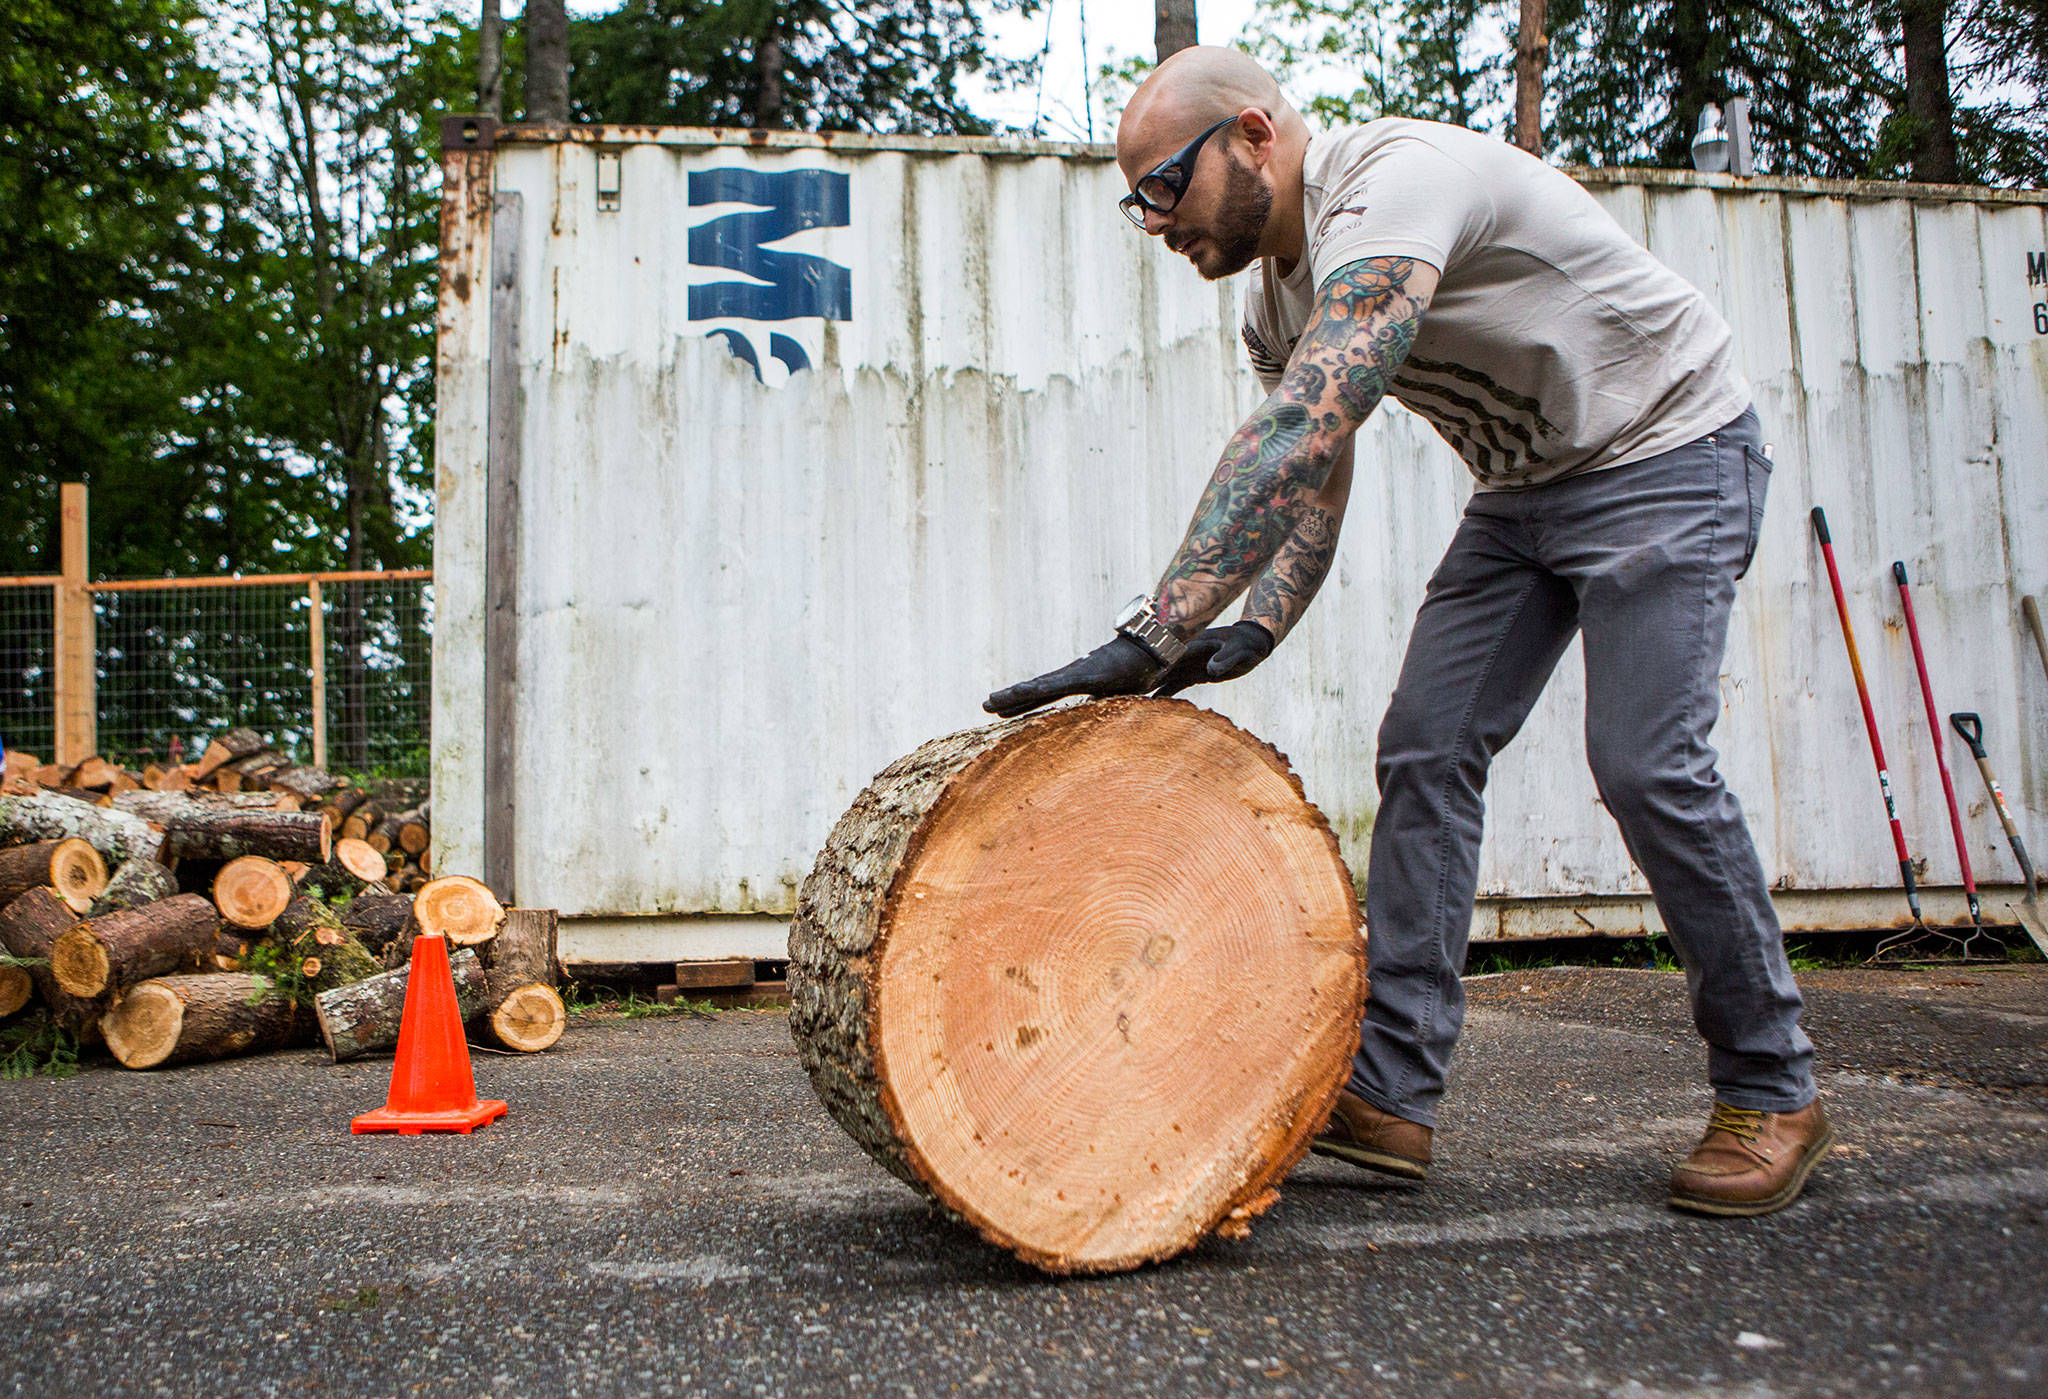 Dustin Comey, of Everett, who served in the Marines, rolls a log from the building site during a Habitat for Humanity Veterans Build event on Saturday in Gold Bar. (Olivia Vanni / The Herald)